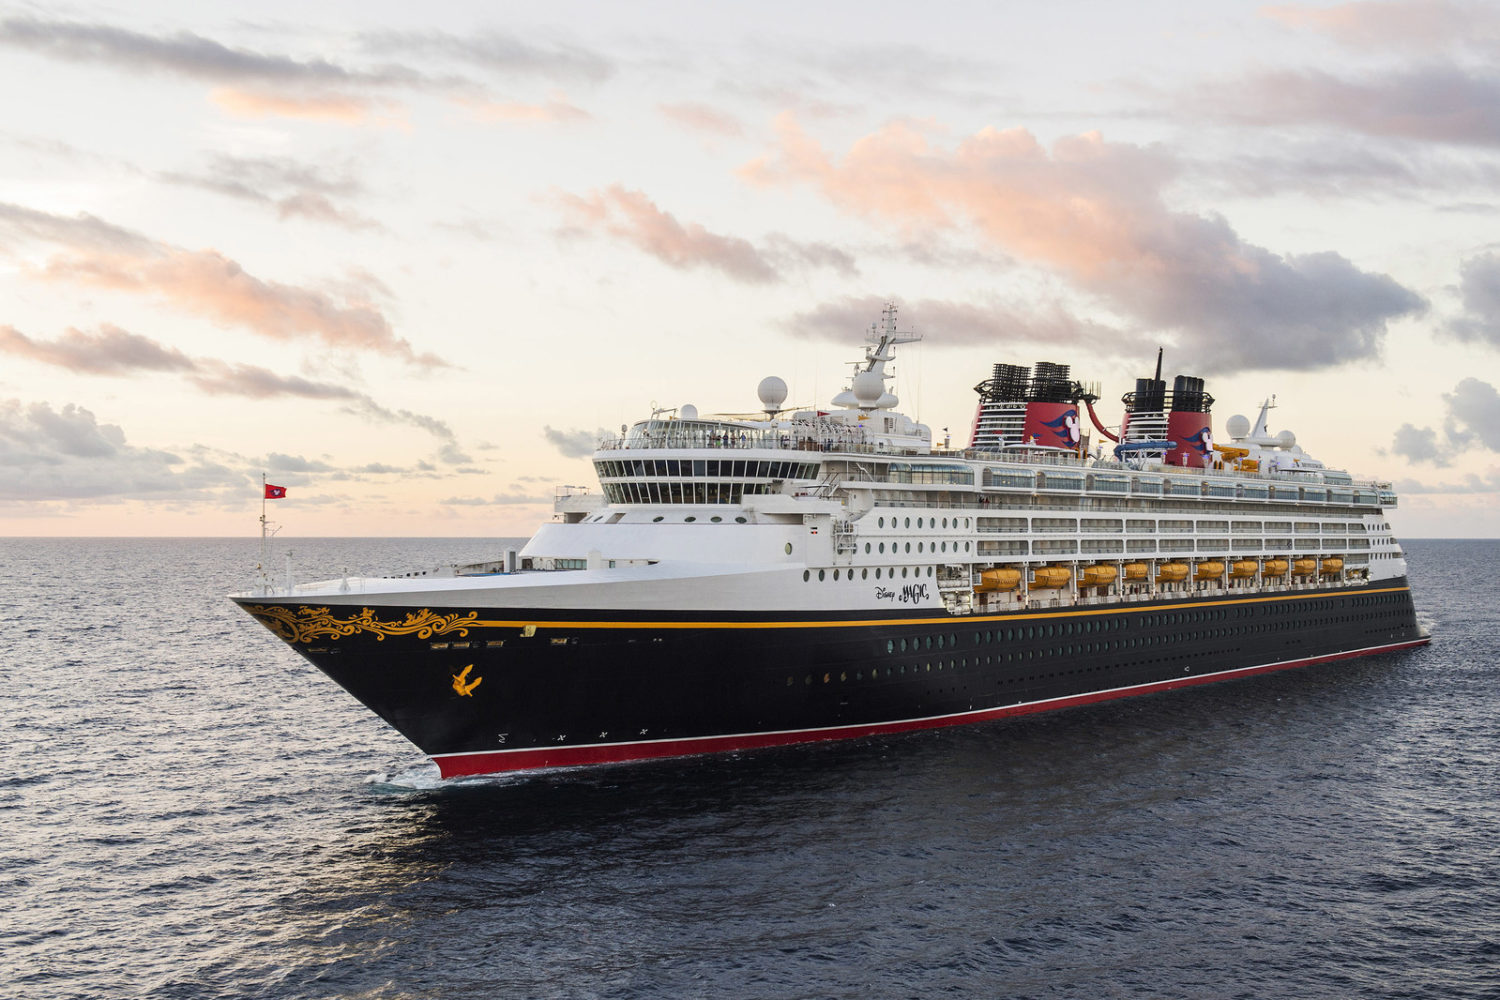 Upgraded Disney Cruise Ship Returns to Miami After MultiMillion Dollar